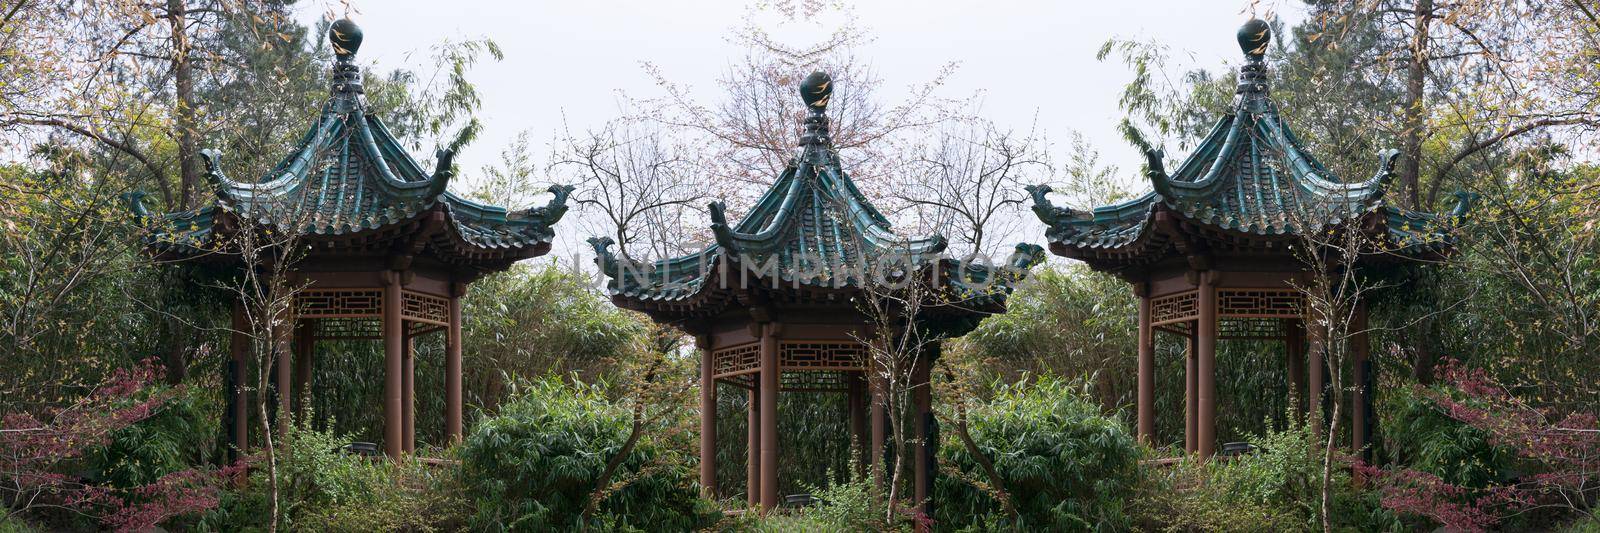 Chinese pavilion surrounded by trees     by JFsPic